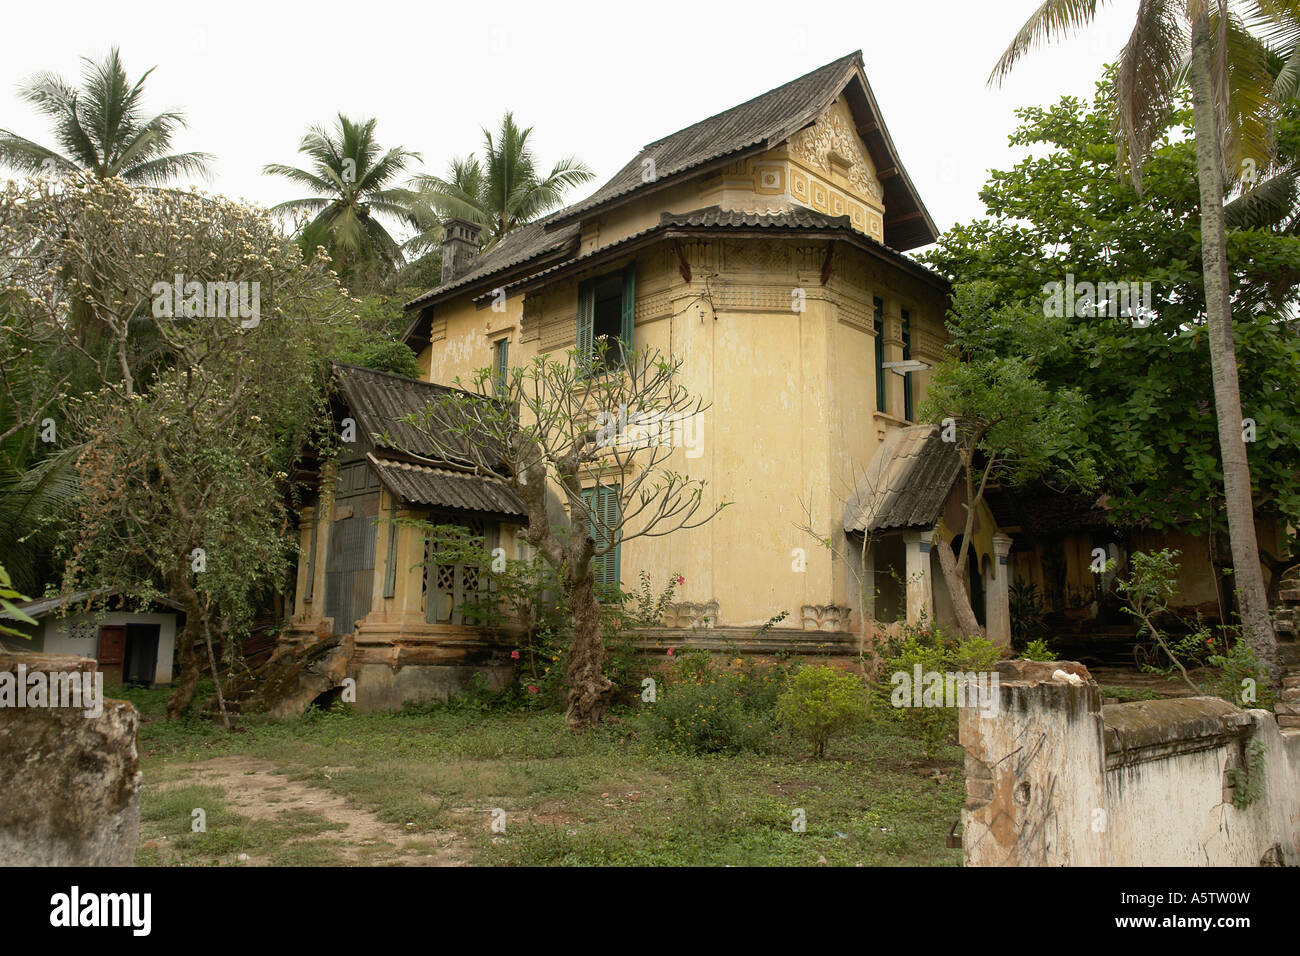 Painet jf5701 laos traditional house luang prabang asia se architecture country developing nation less economically Stock Photo